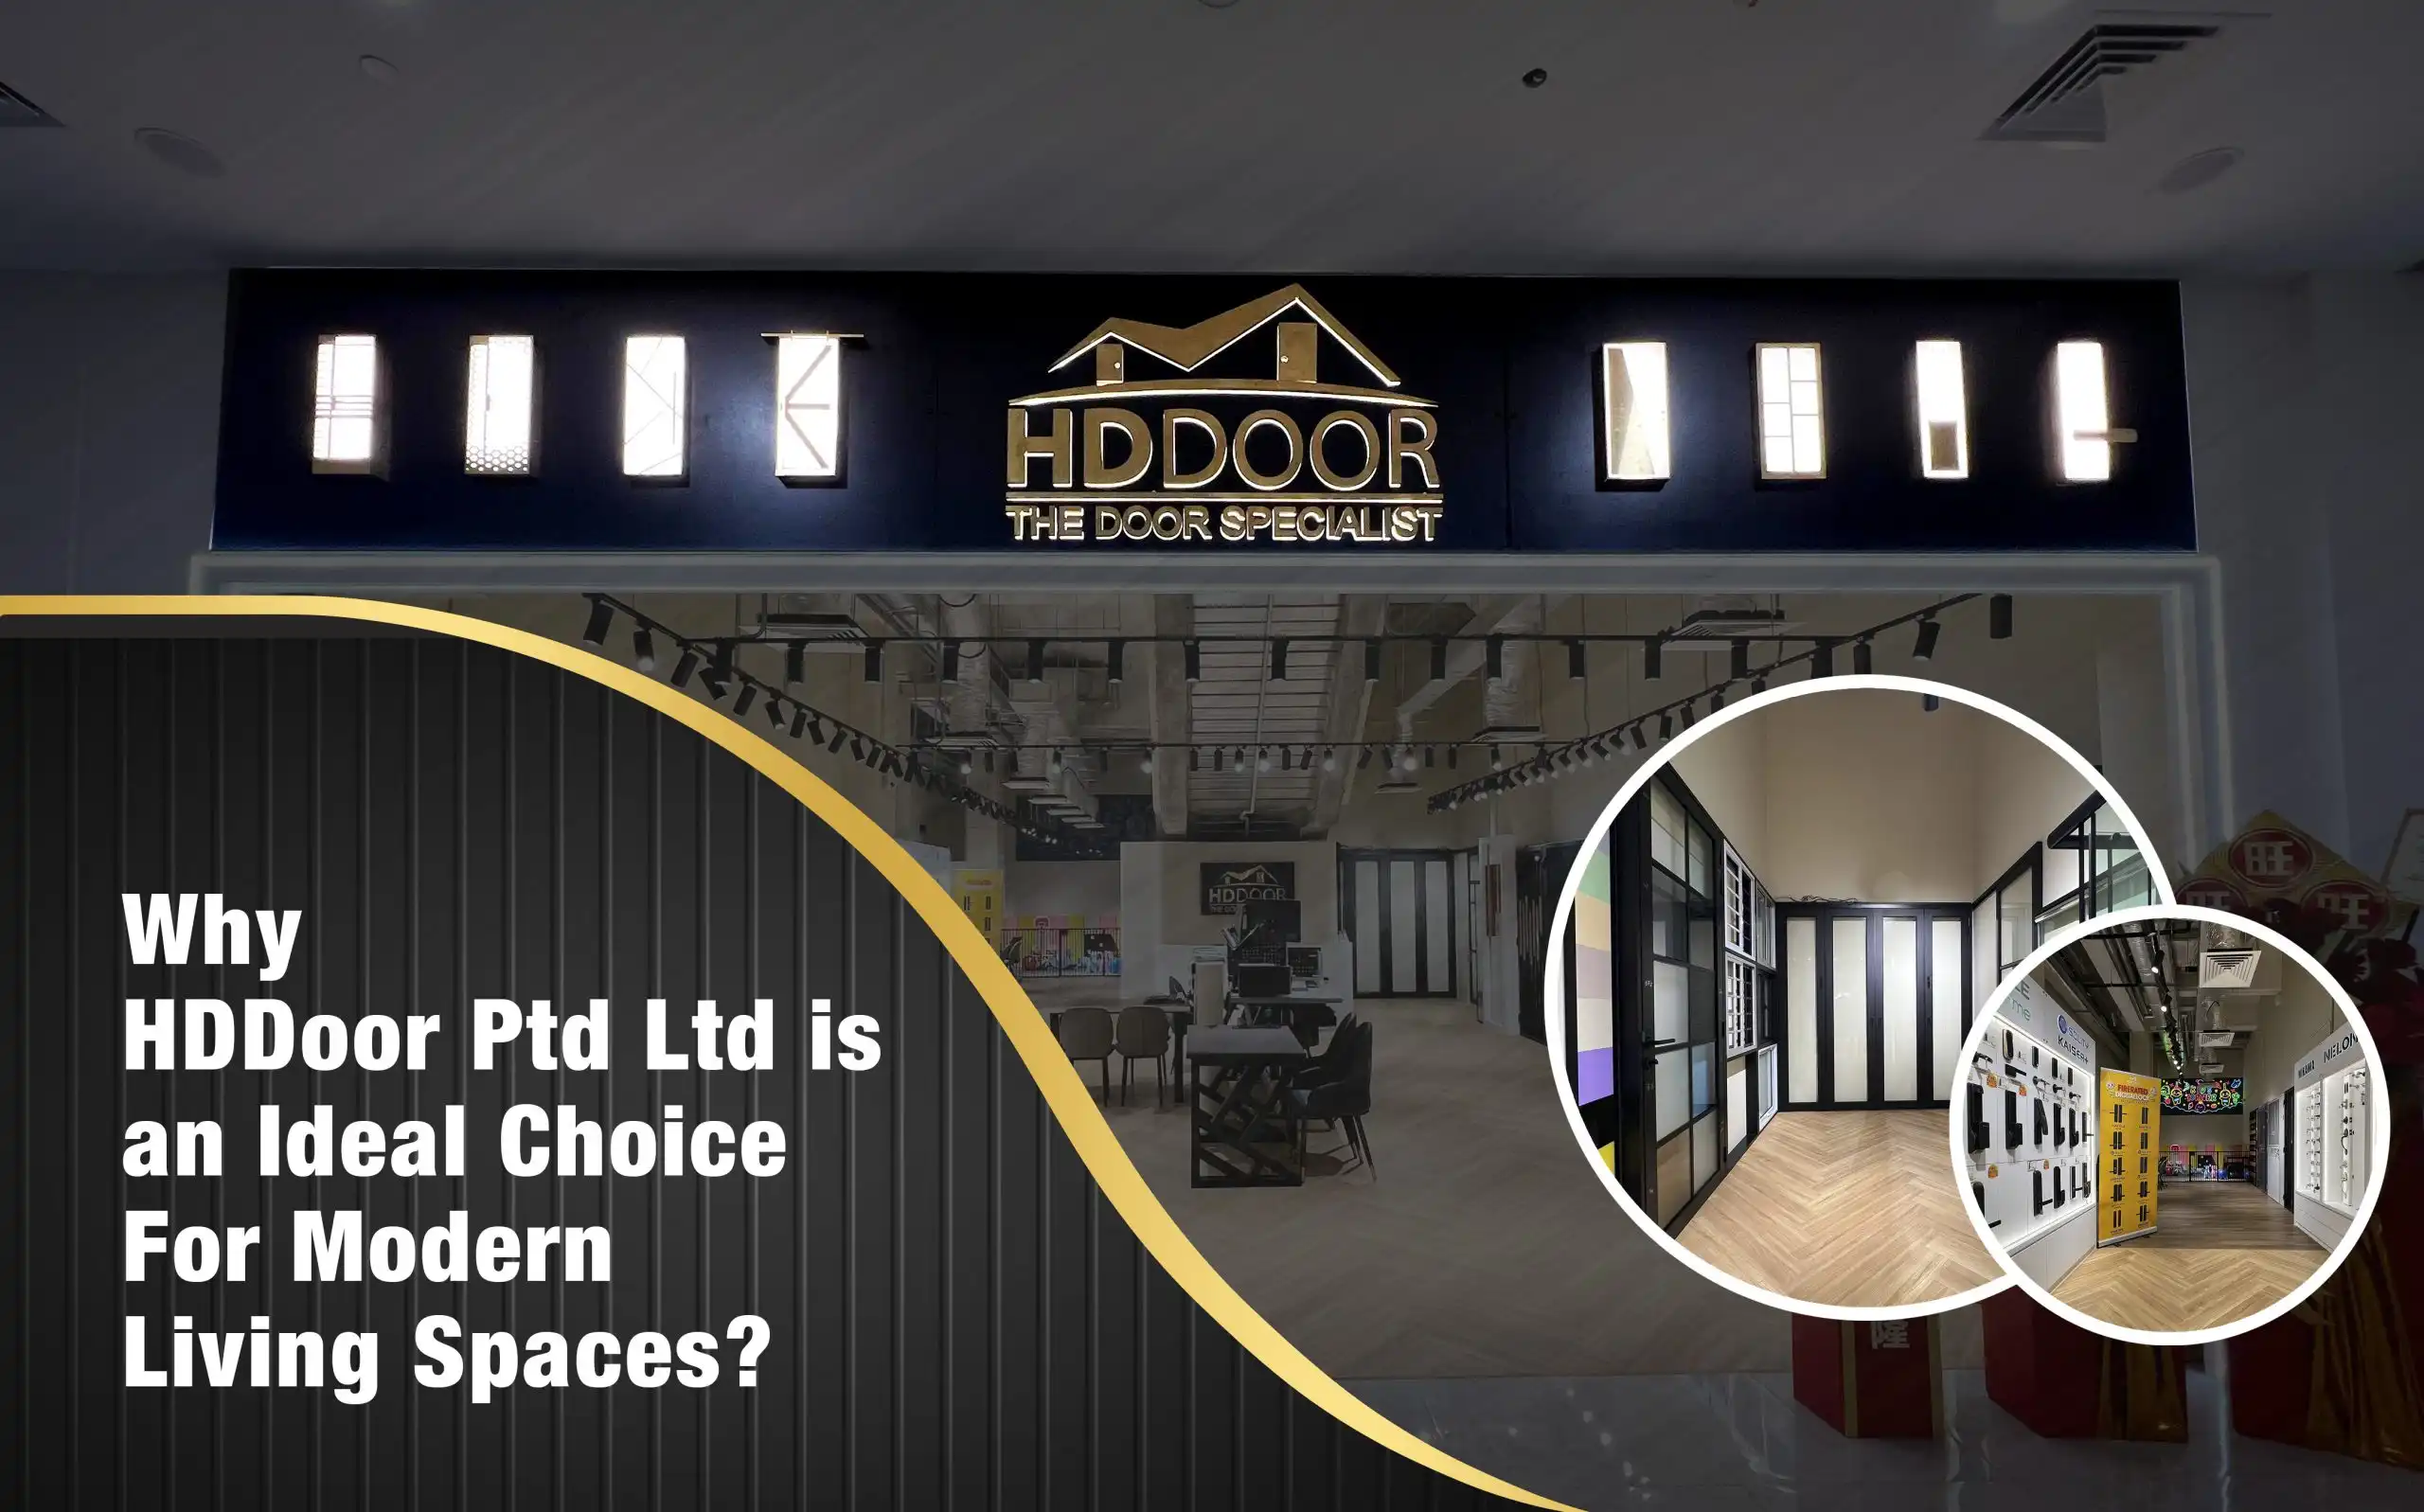 why-hddoor-ptd-ltd-is-an-ldeal-choice-for-modern-living-spaces